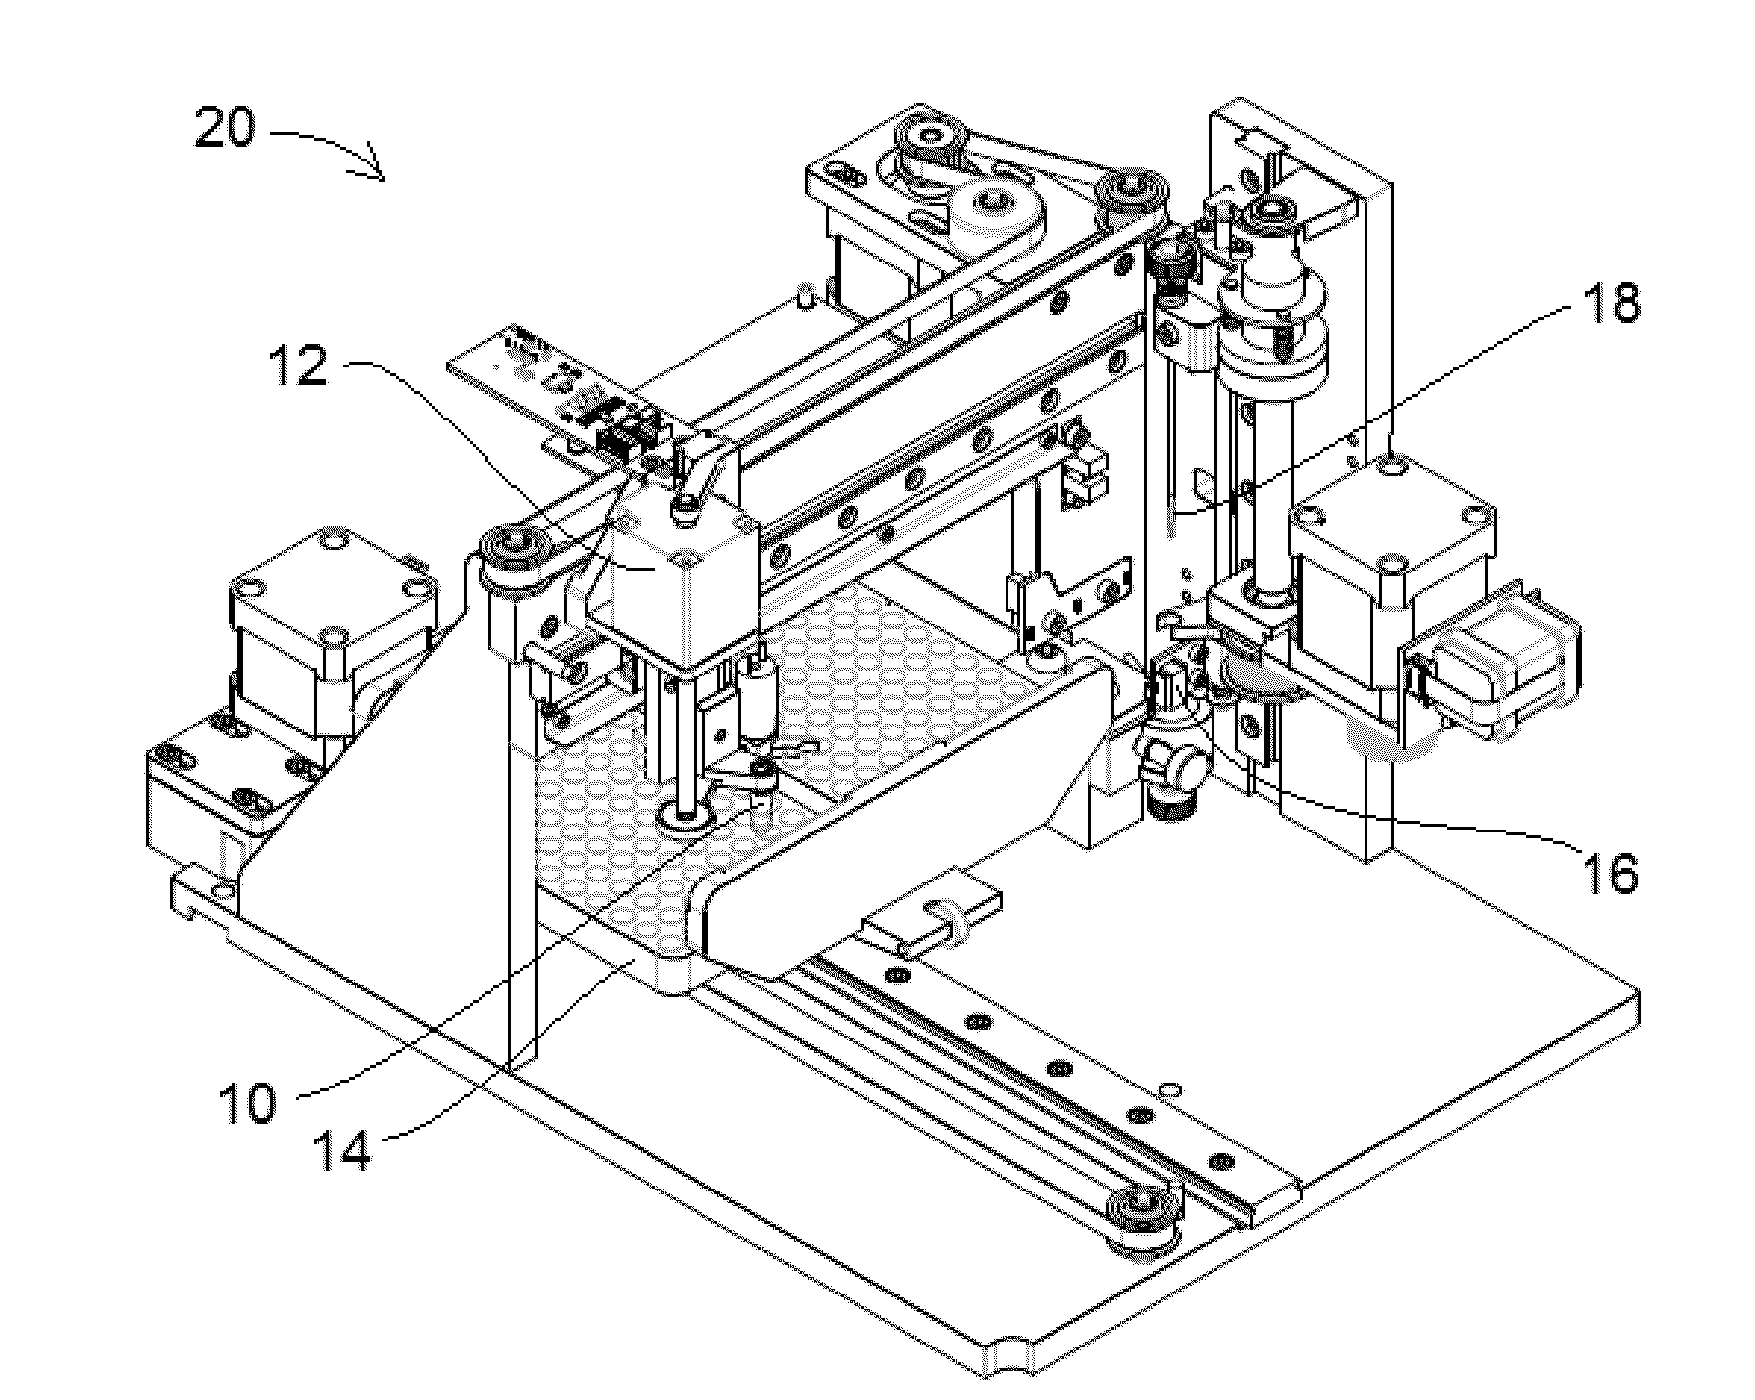 Automated system for handling components of a chromatographic system